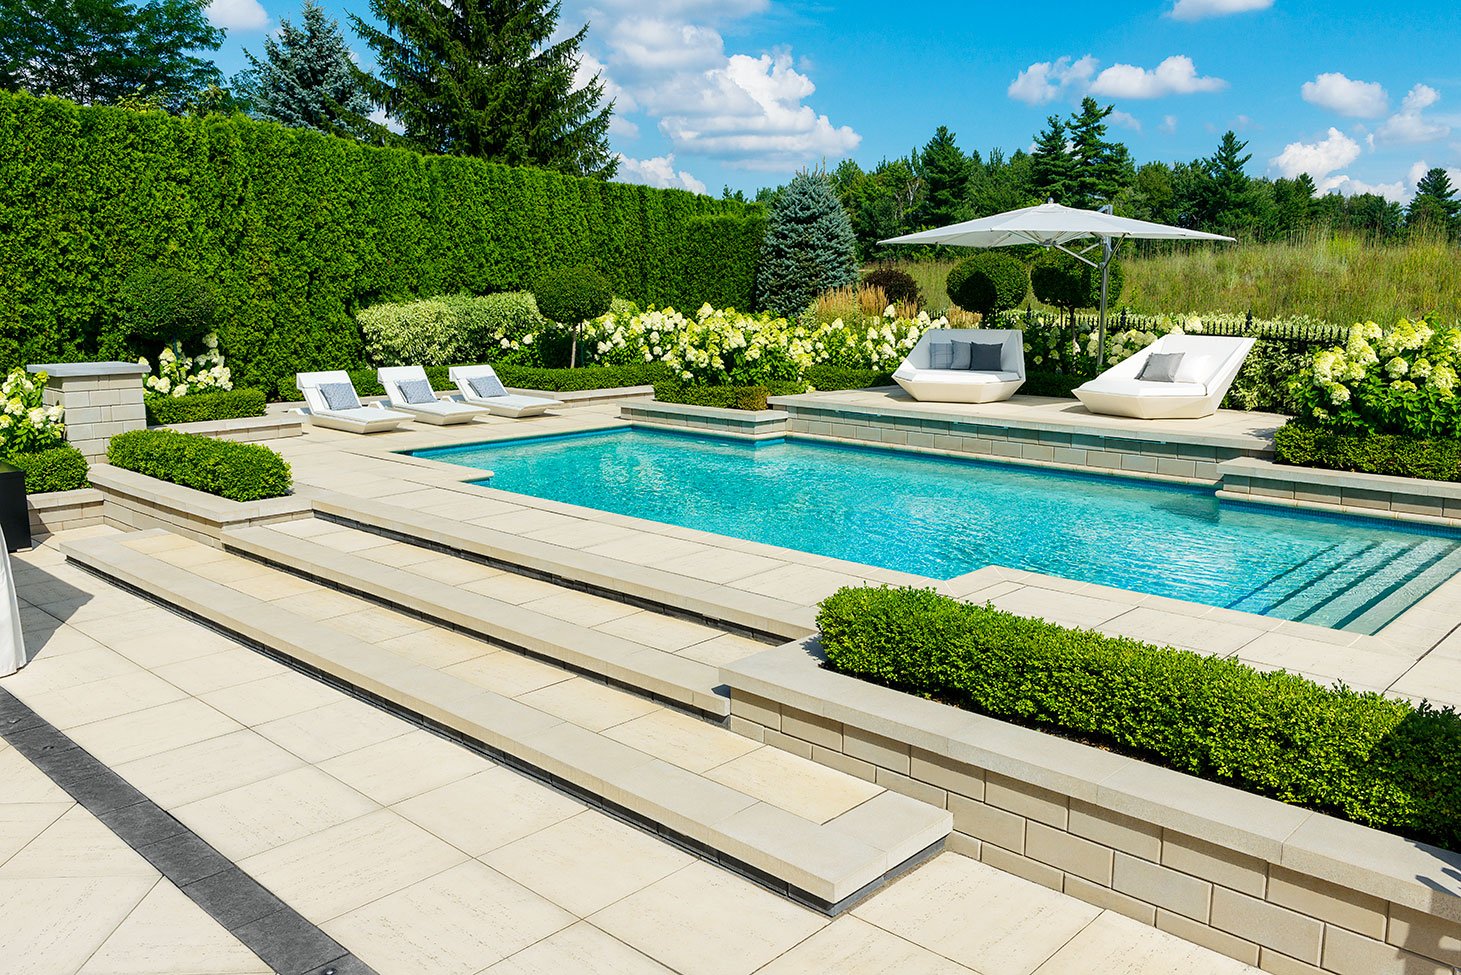 Discover our most popular and functional pool coping pavers for your swimming pool